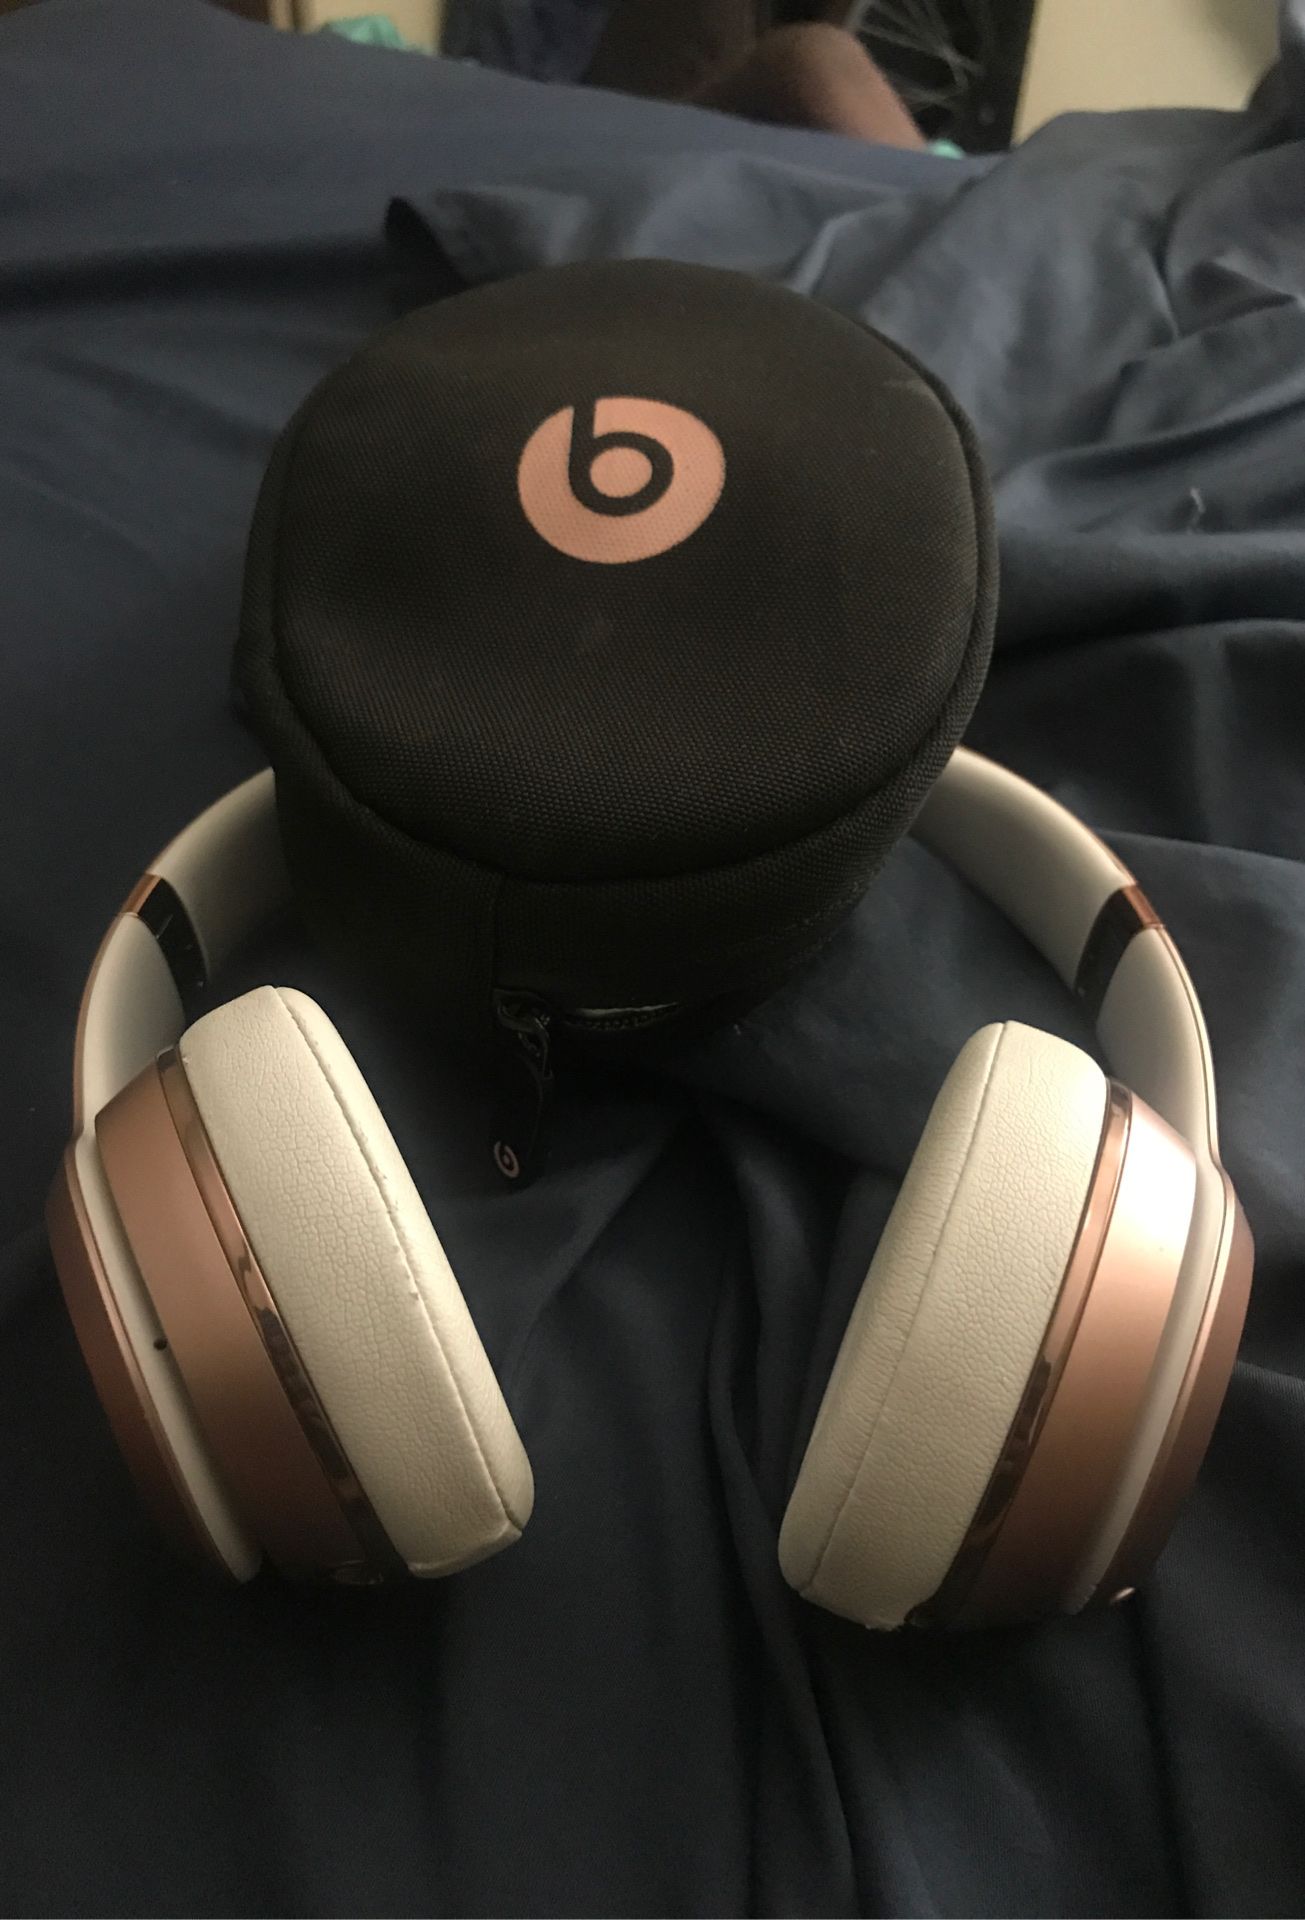 Apple "Beats Solo3 Wireless Headphones Rose Gold with charger and case